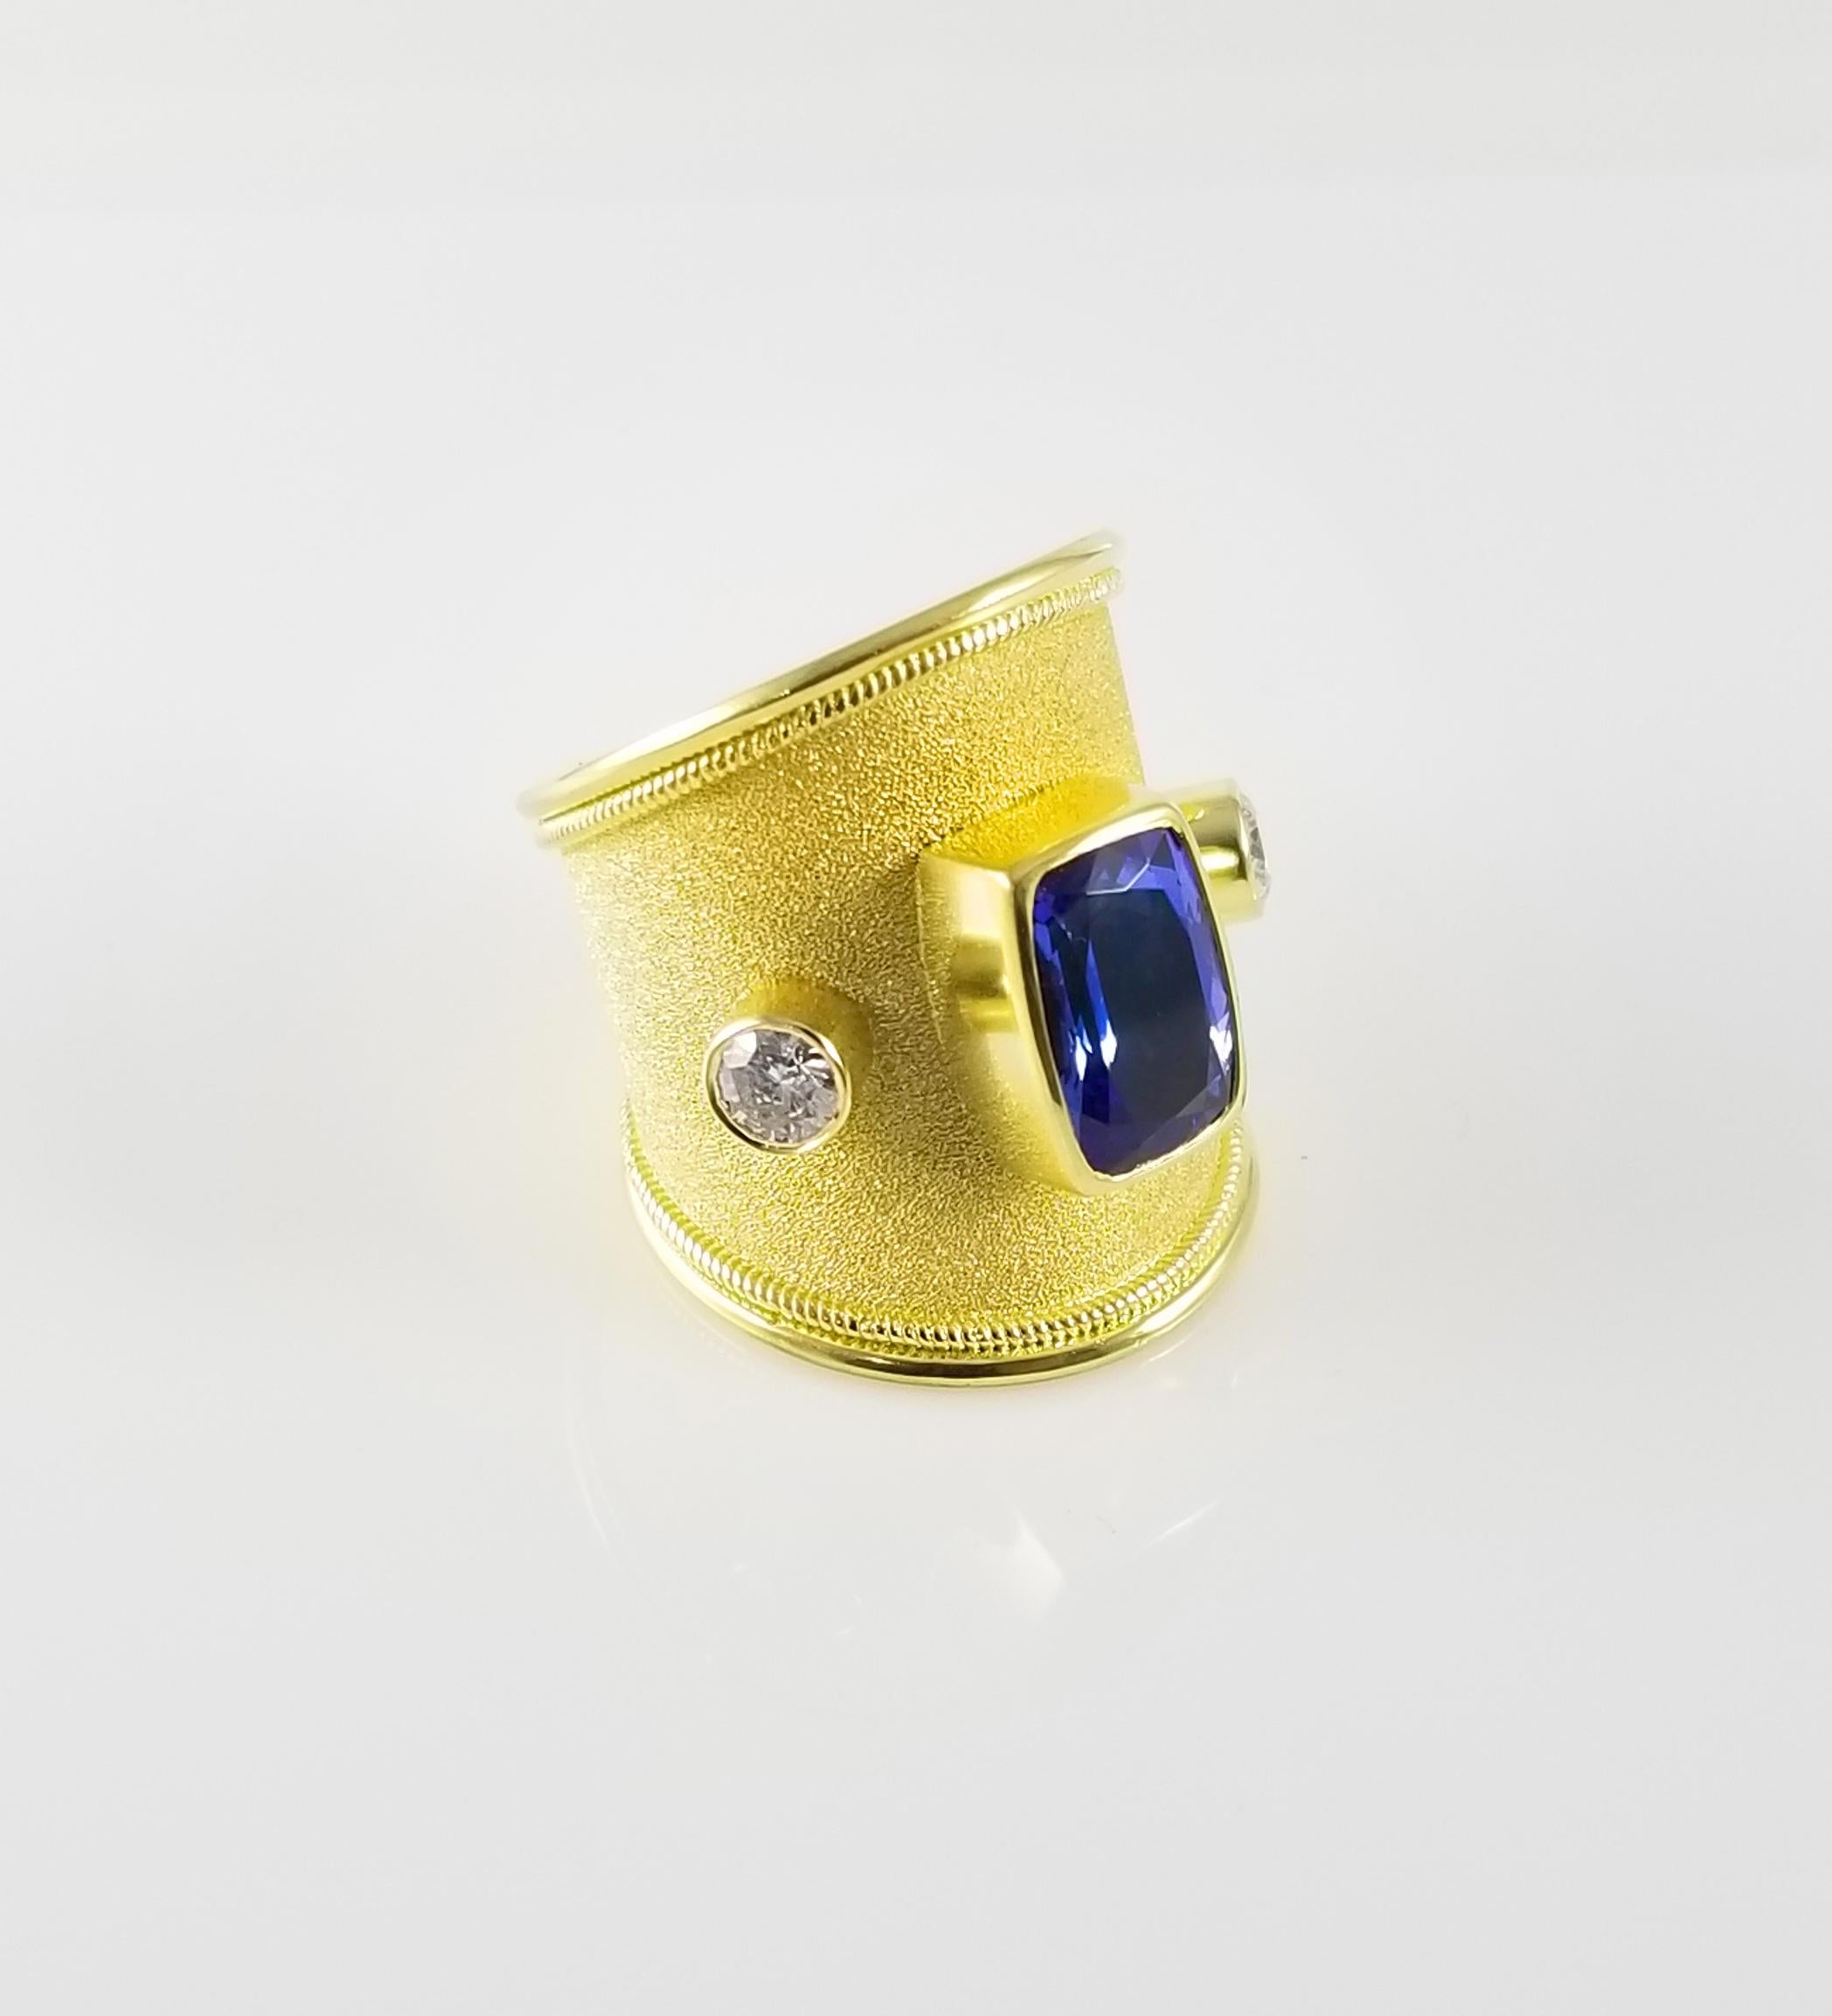 S.Georgios designer 18 Karat Solid Yellow Gold Ring all handmade with a Byzantine Granulation Workmanship and a unique velvet background. The stunning ring has 1 center Cushion Cut Tanzanite total weight of 3,67 Carats and 2 Brilliant cuts of White